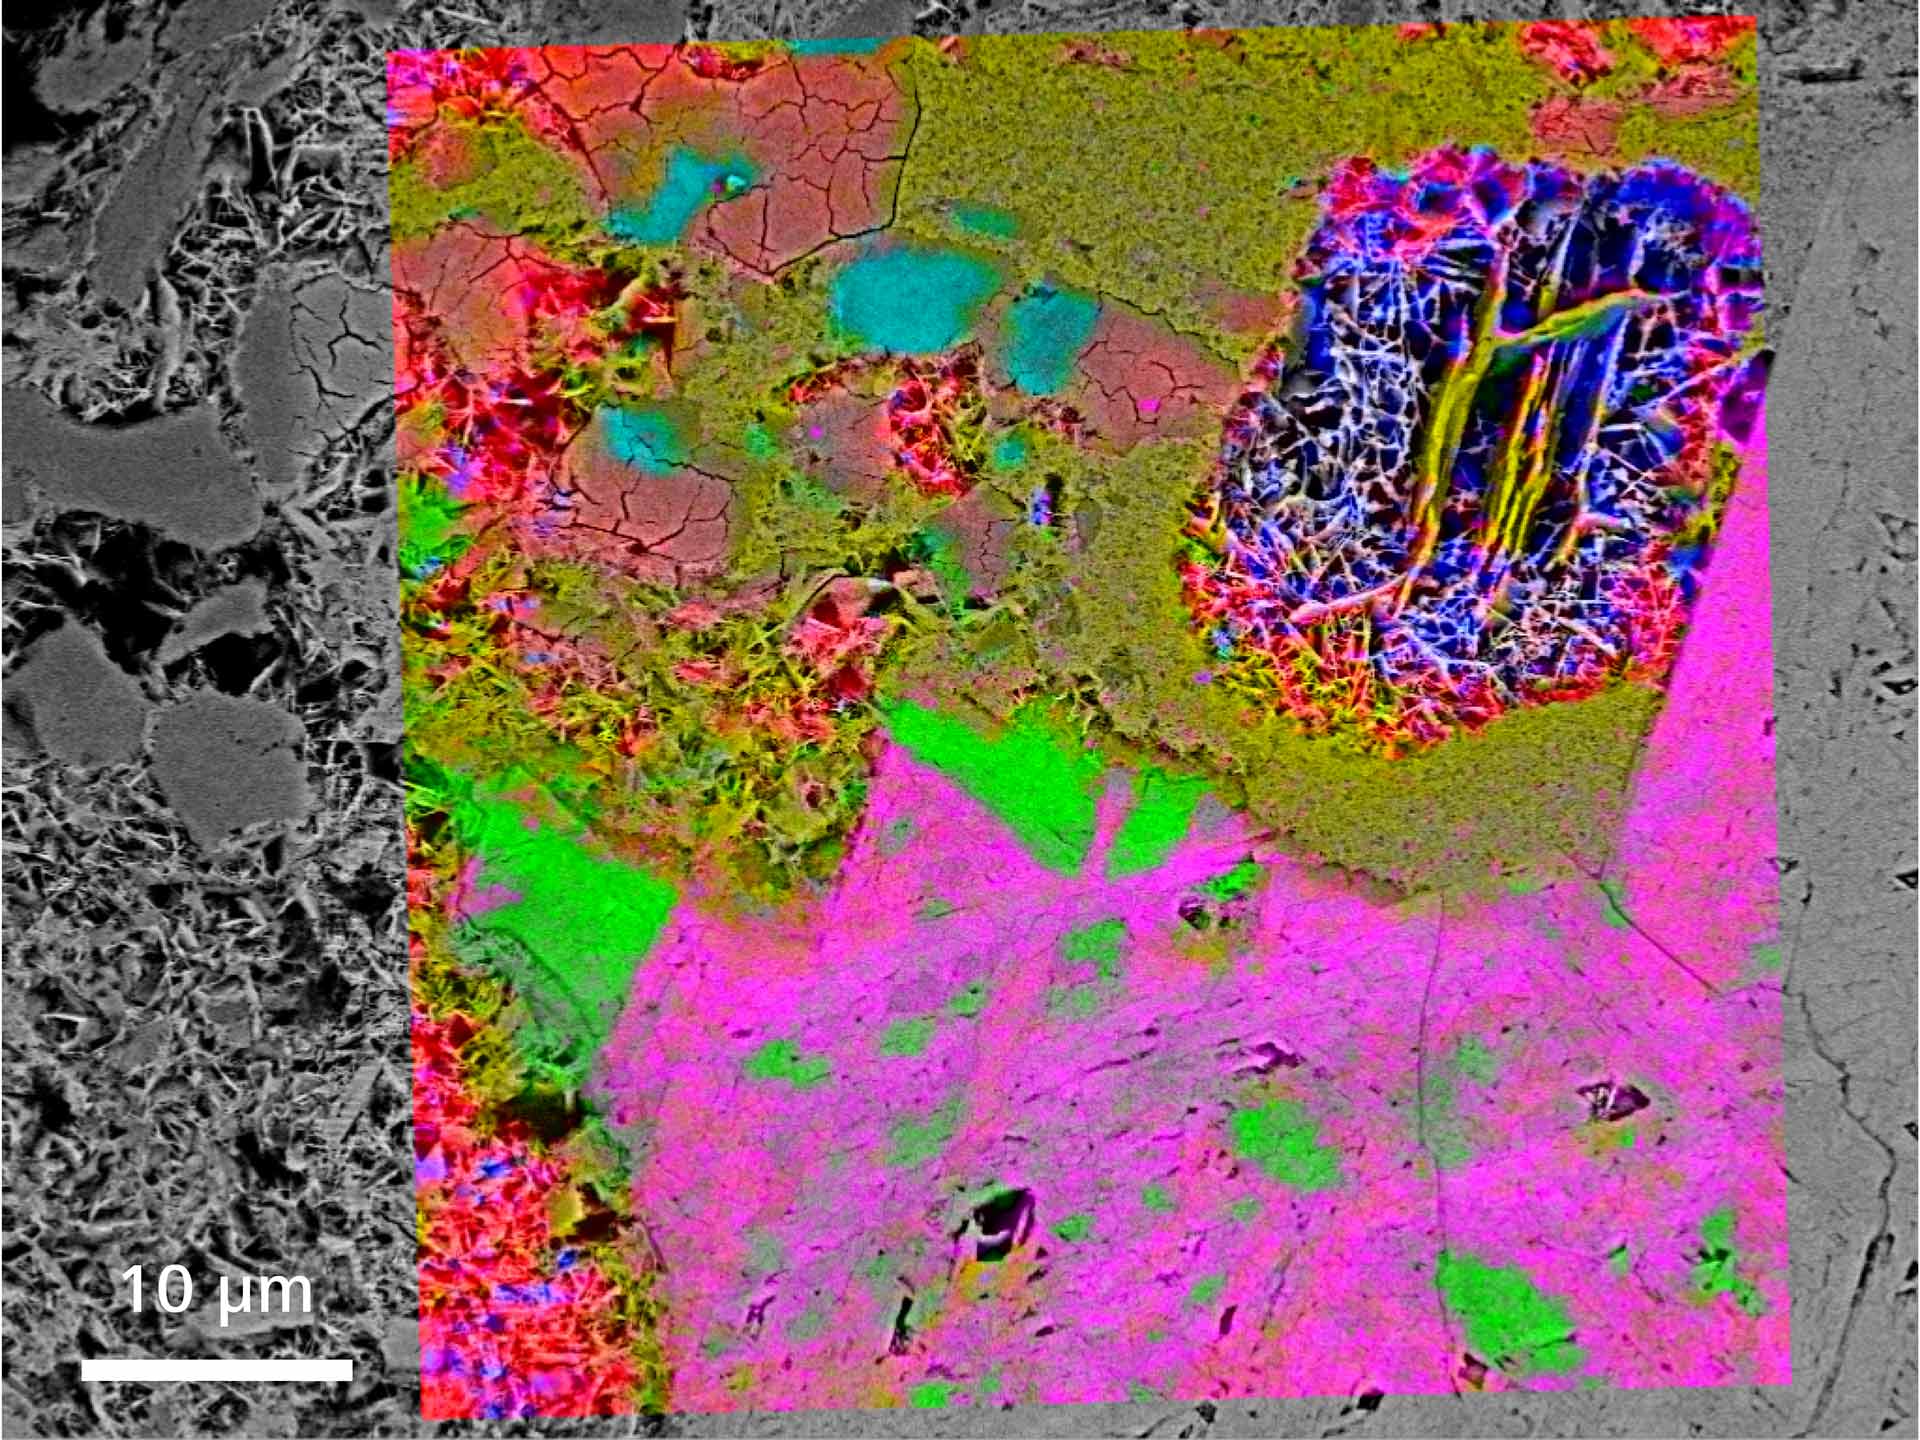 Iron Mineralogy: Raman identification of iron ore mineral, SEM image and Raman maps overlaid. (Hematite is red, blue, green, orange and pink; goethite is light blue).